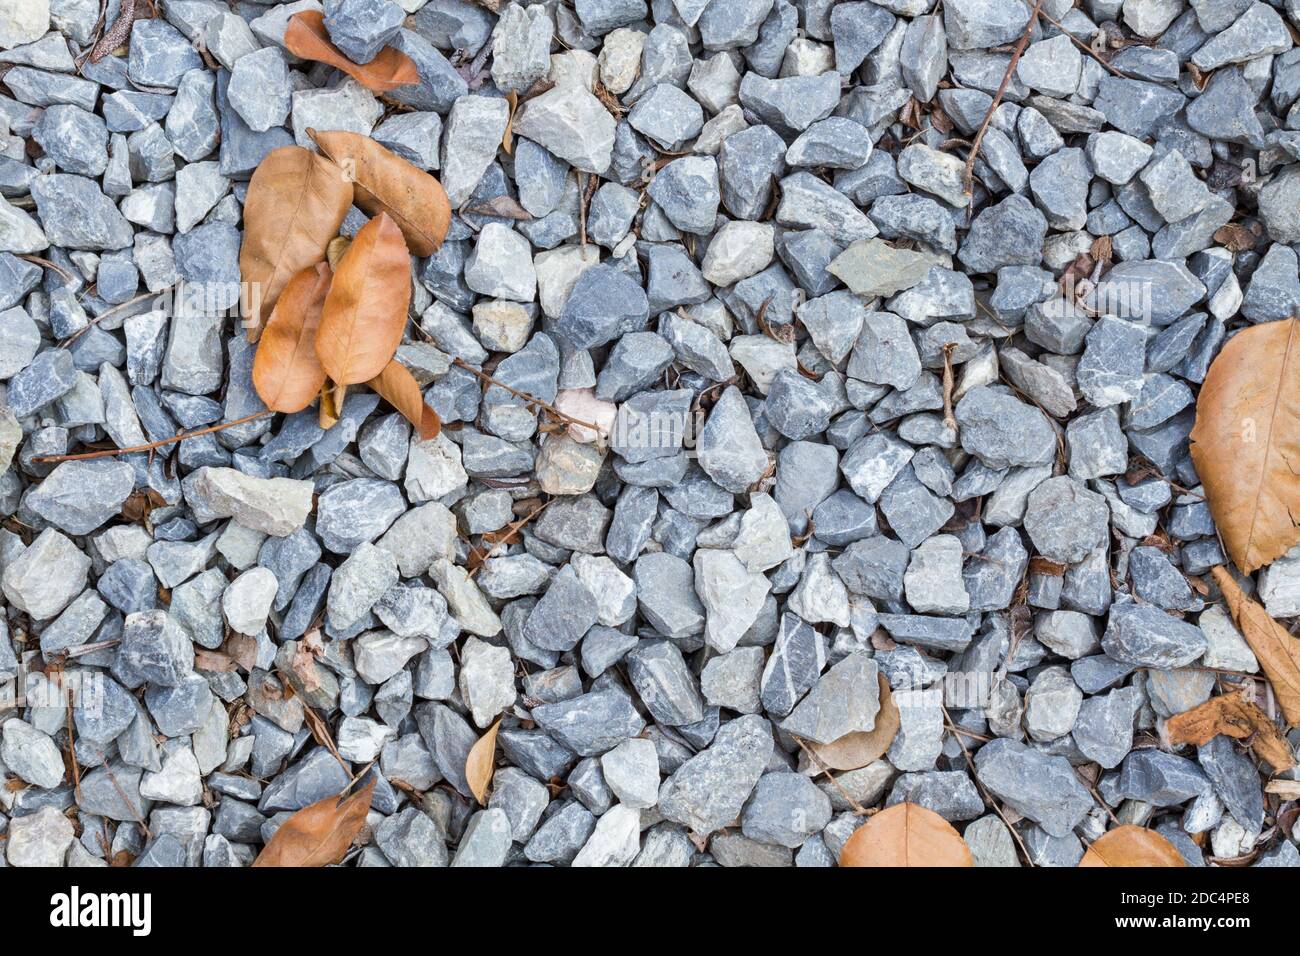 blue rock texture on the ground, with dry leaves, background Stock Photo